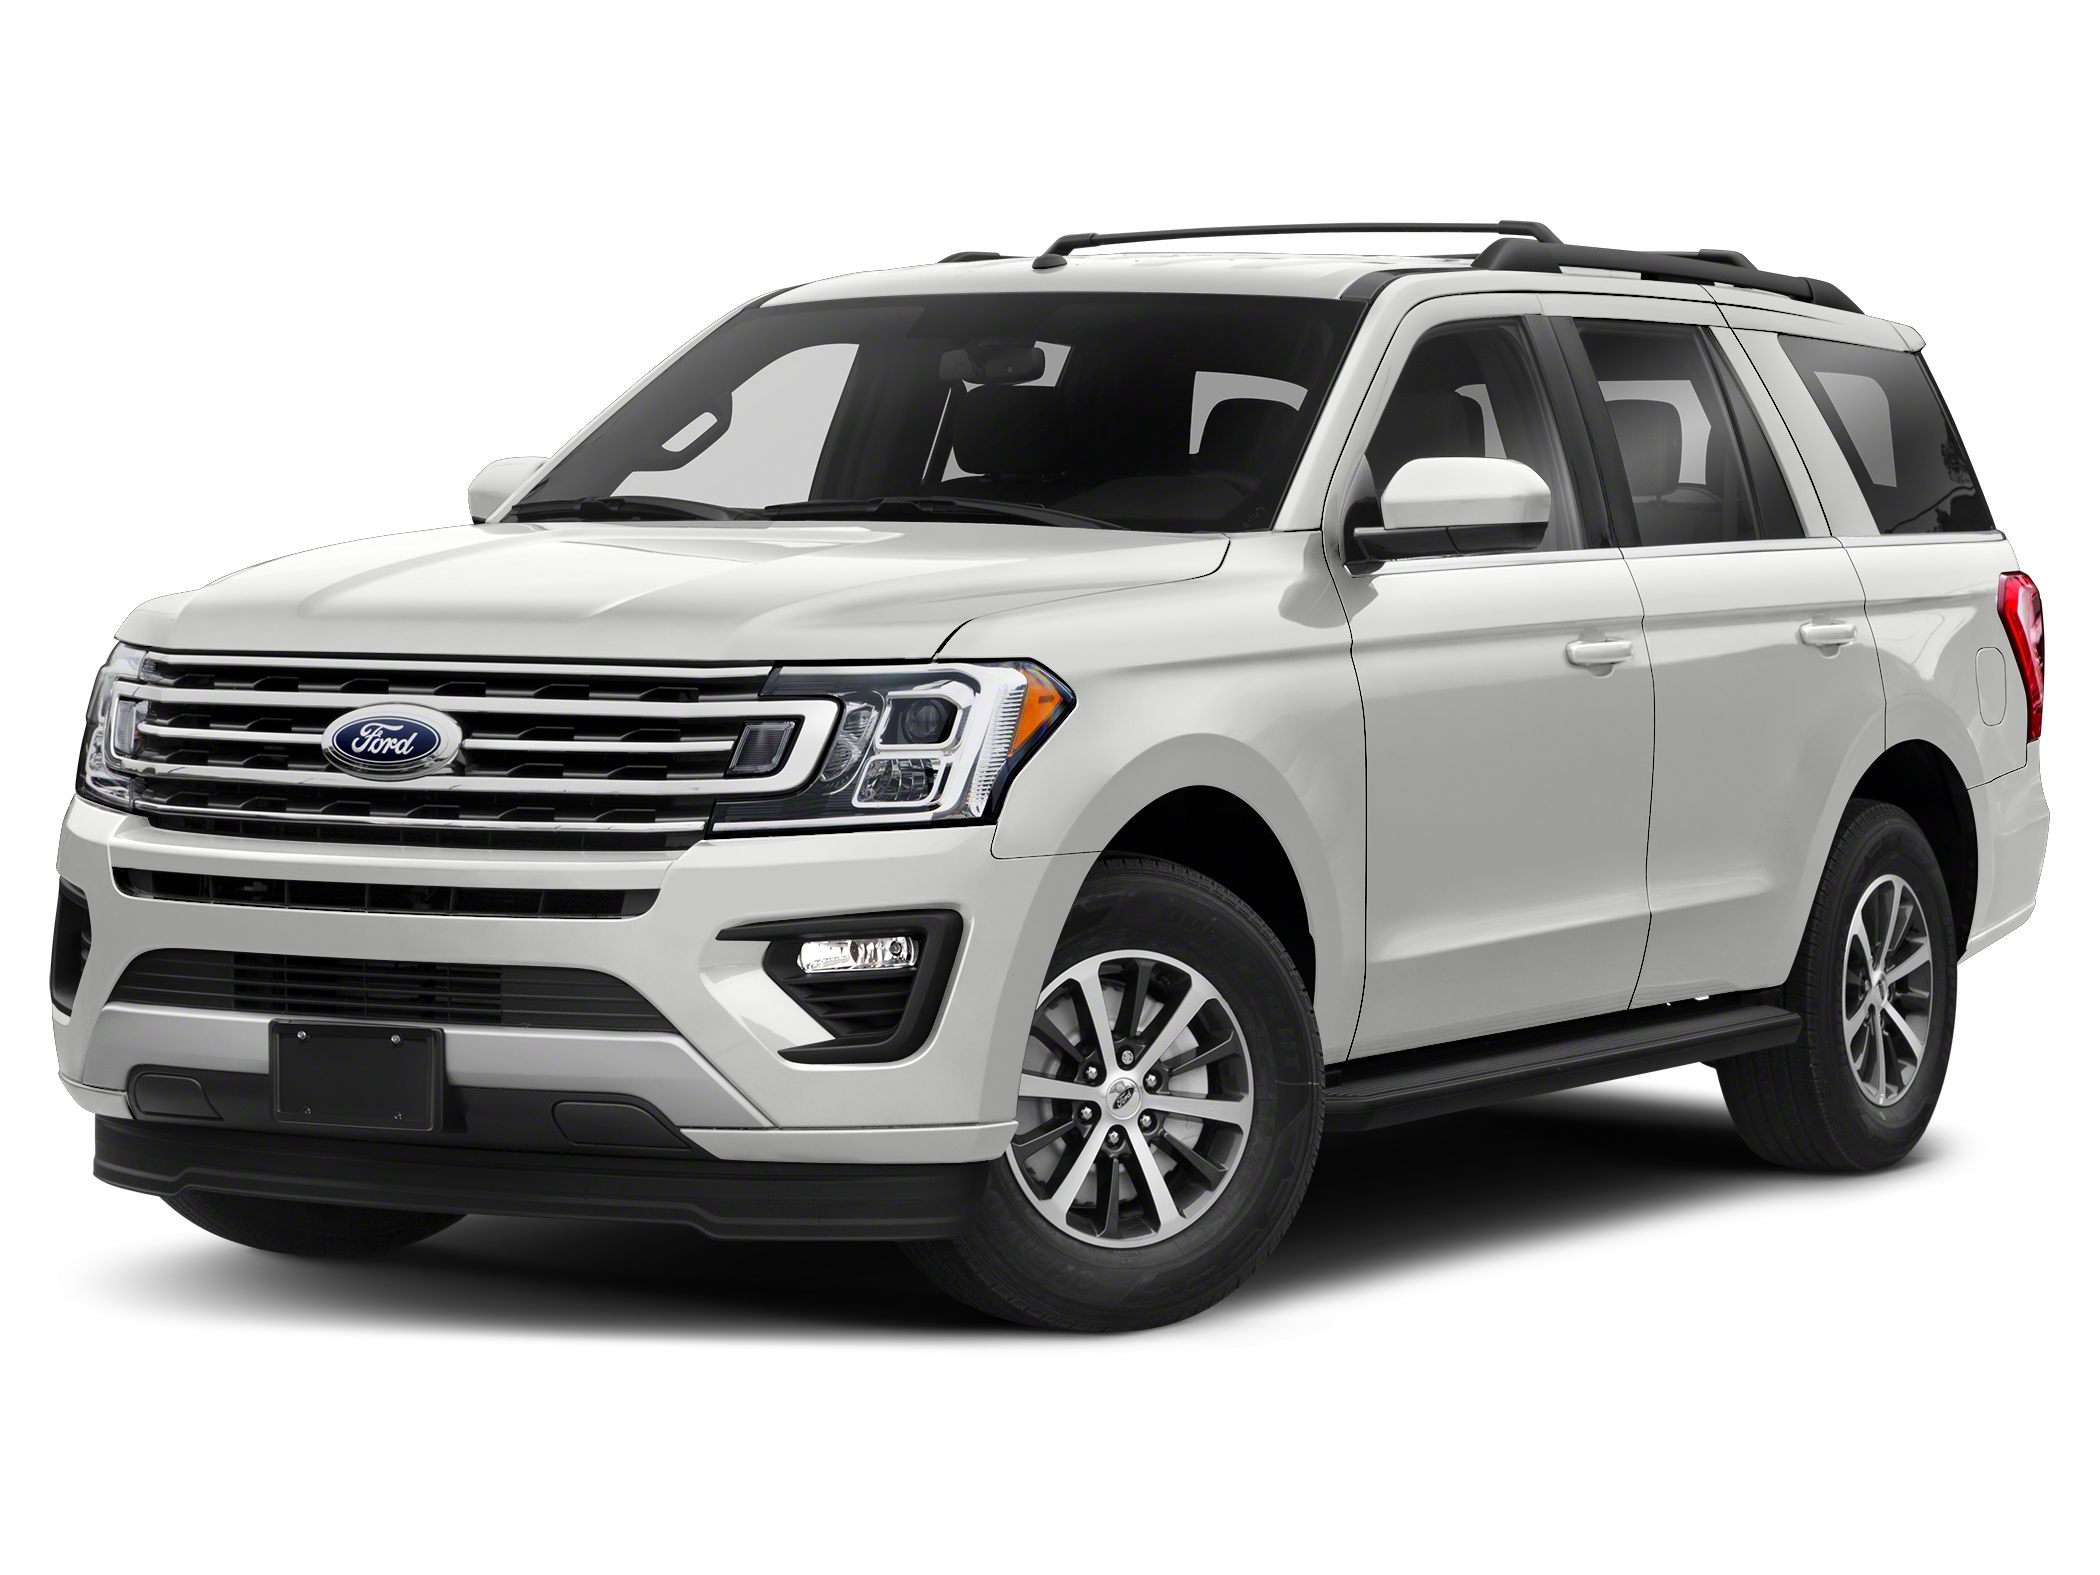 2019 Ford Expedition XLT -
                League City, TX